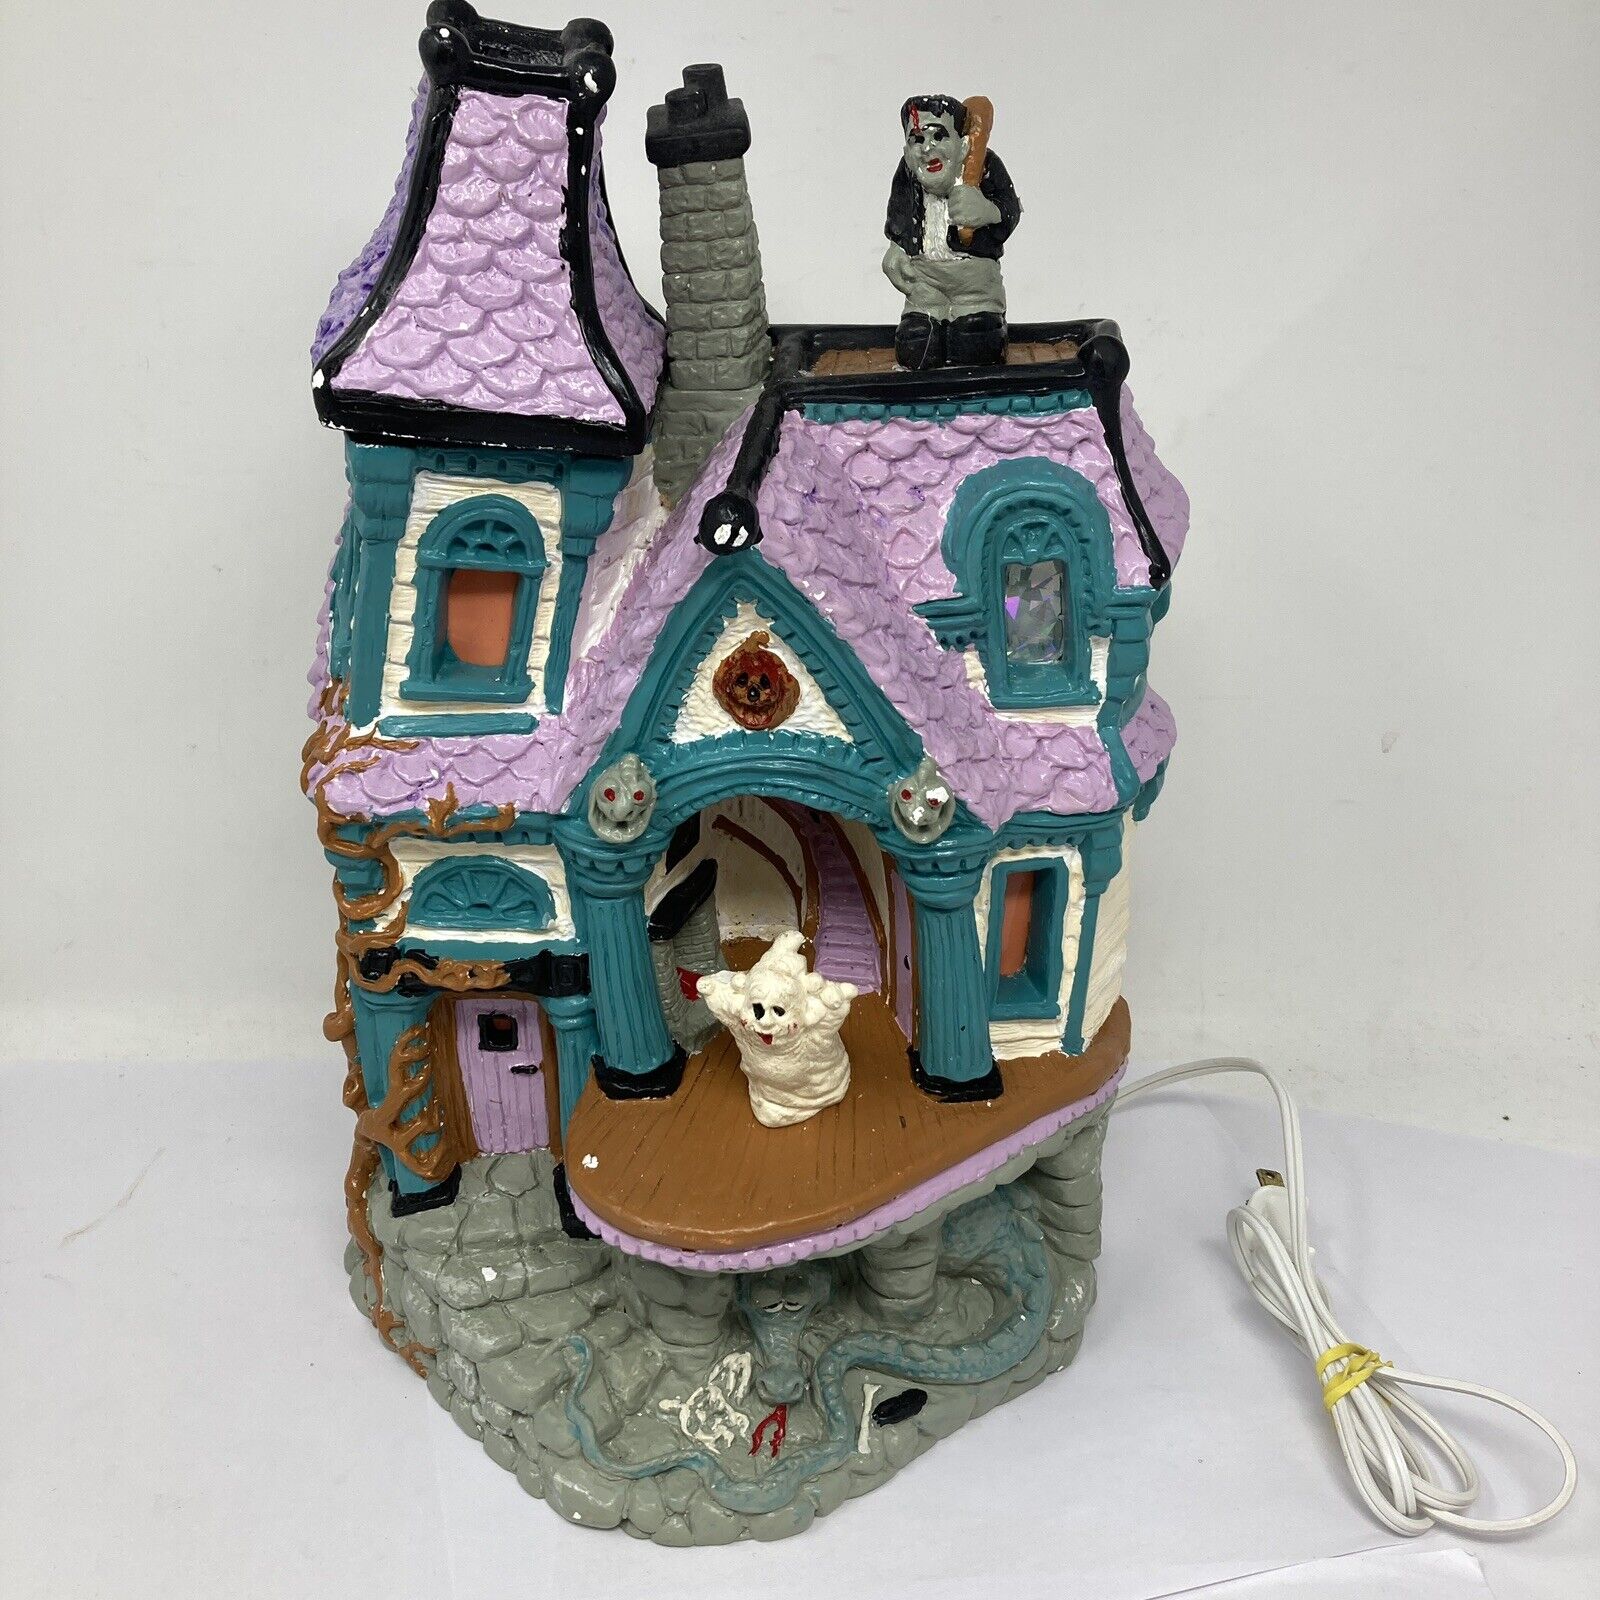 Vintage Wee Crafts Halloween LIGHT UP MONSTER MANSION HOUSE Painted ghost 90s